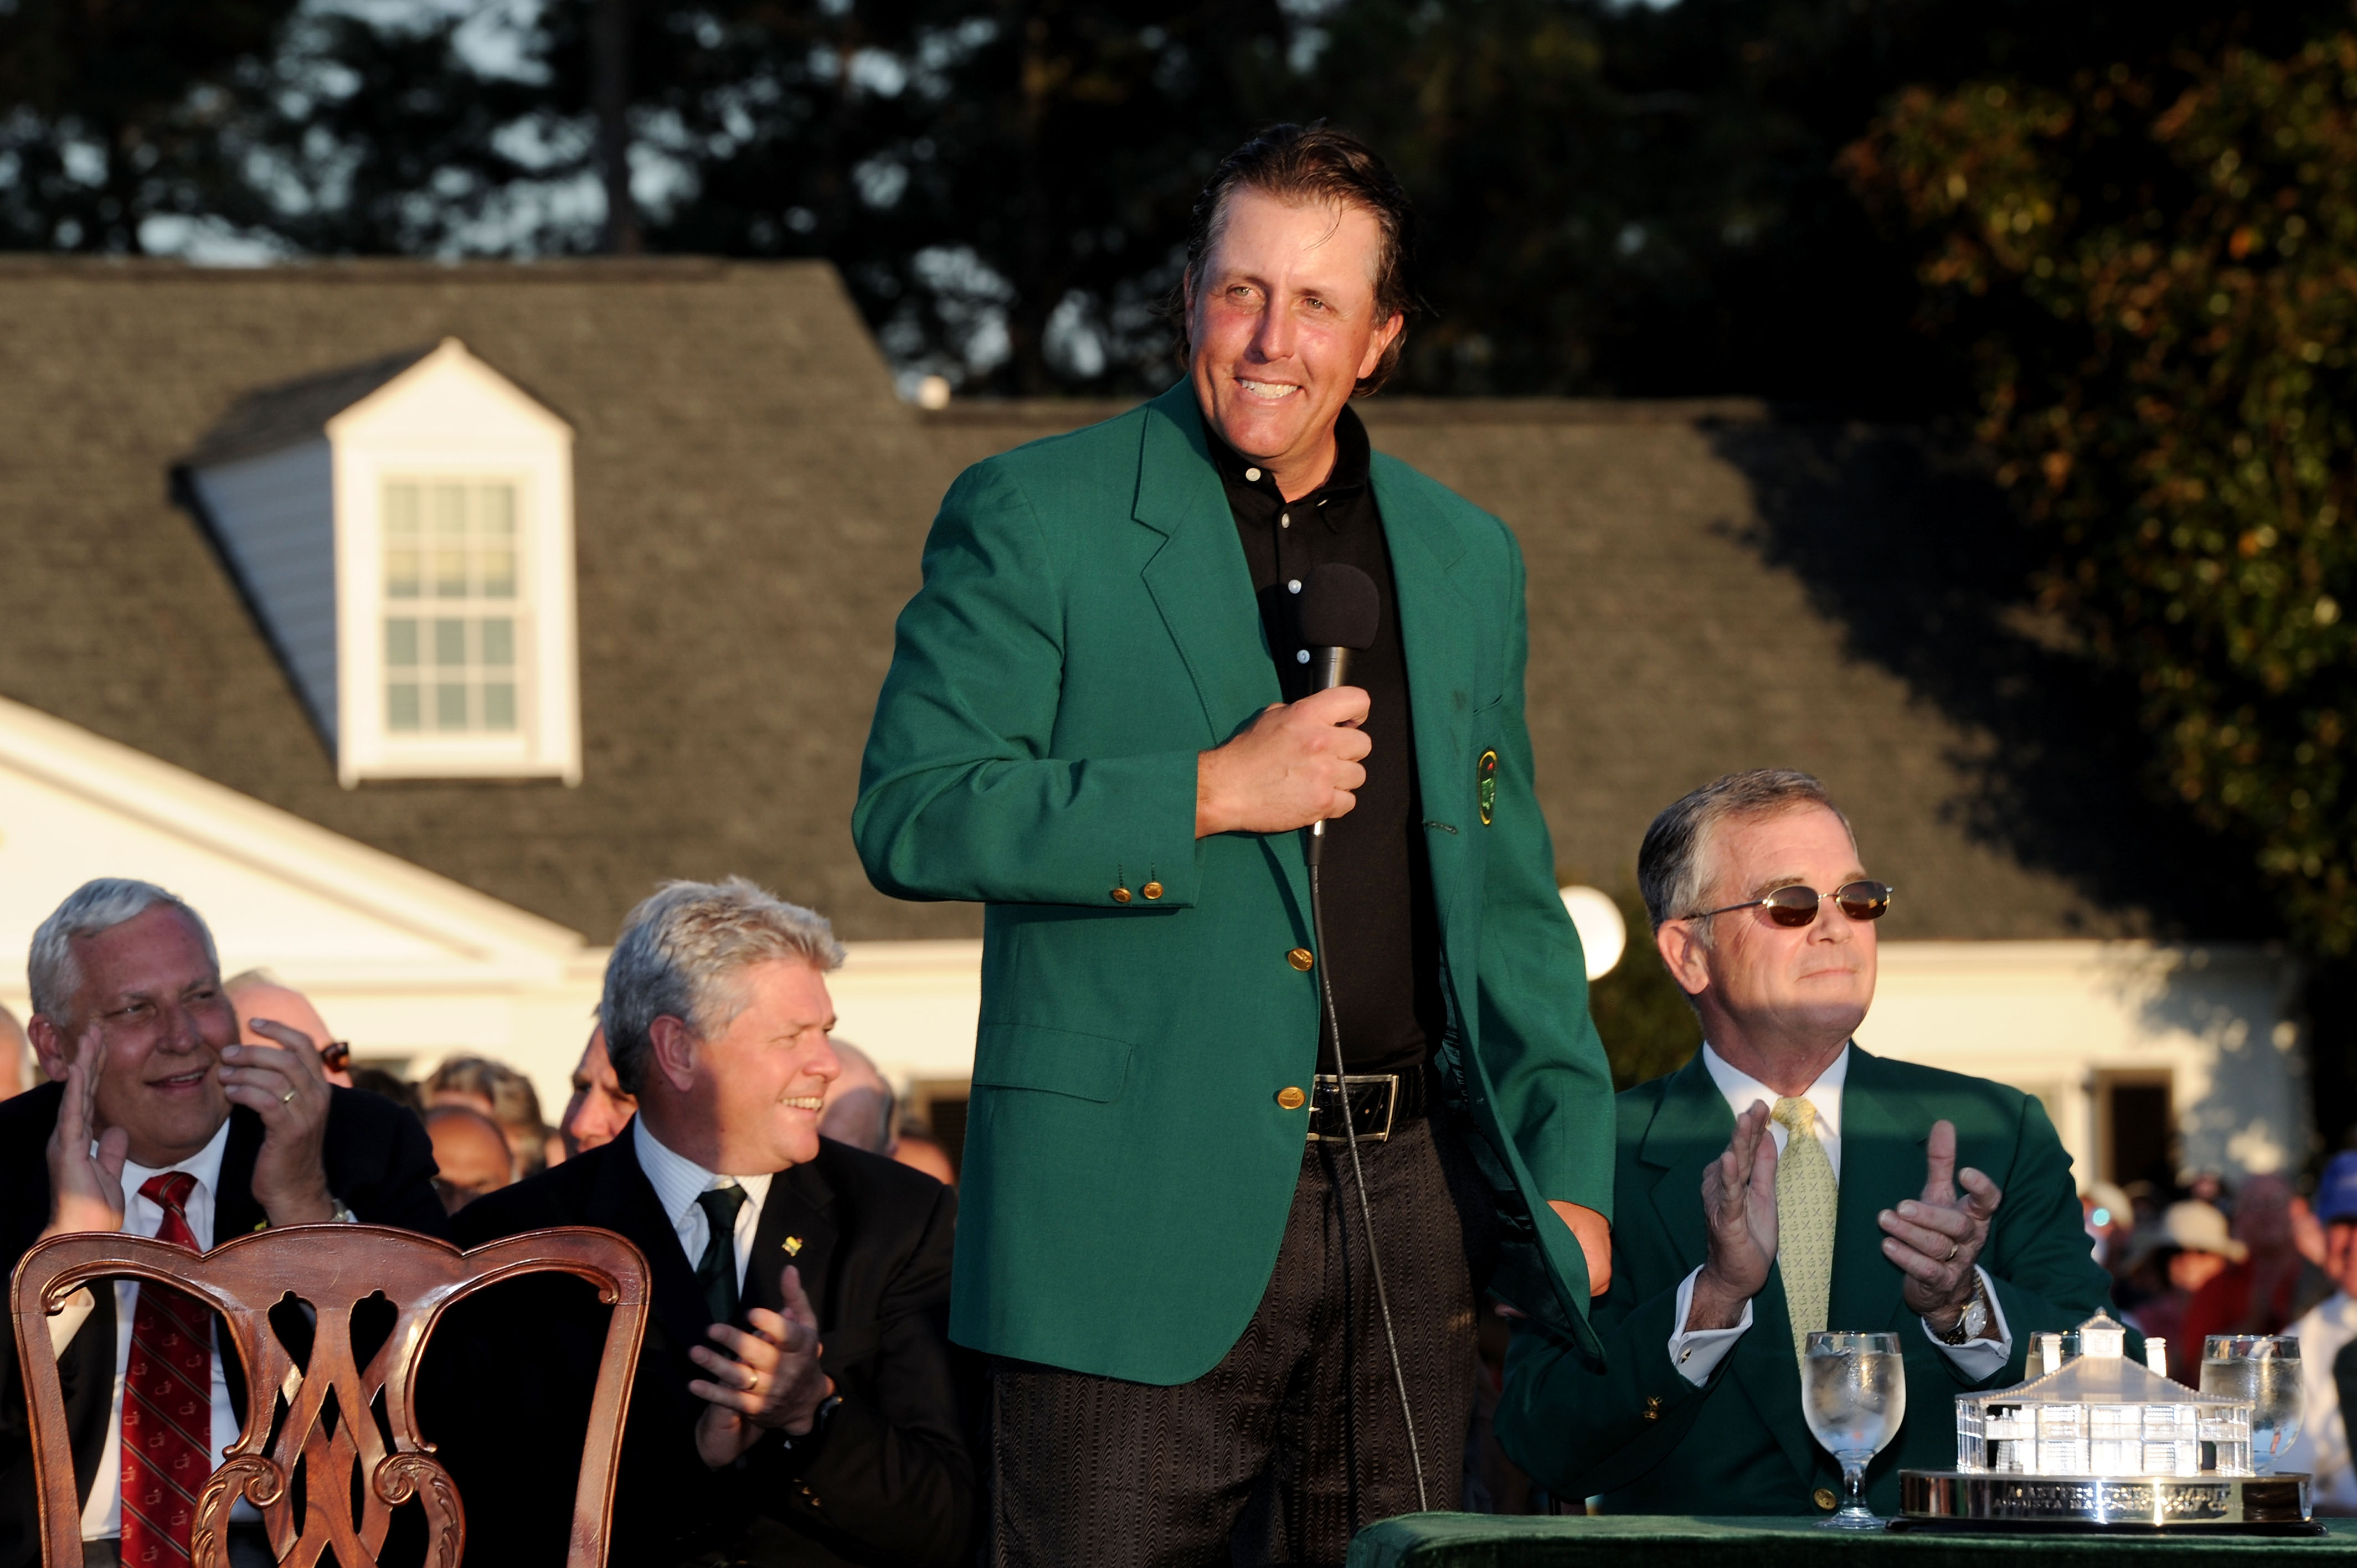 AUGUSTA, GA - APRIL 11:  Phil Mickelson speaks to the gallery as Augusta National Chairman William Porter 'Billy' Payne (R) looks on during the green jacket presentation after the final round of the 2010 Masters Tournament at Augusta National Golf Club on